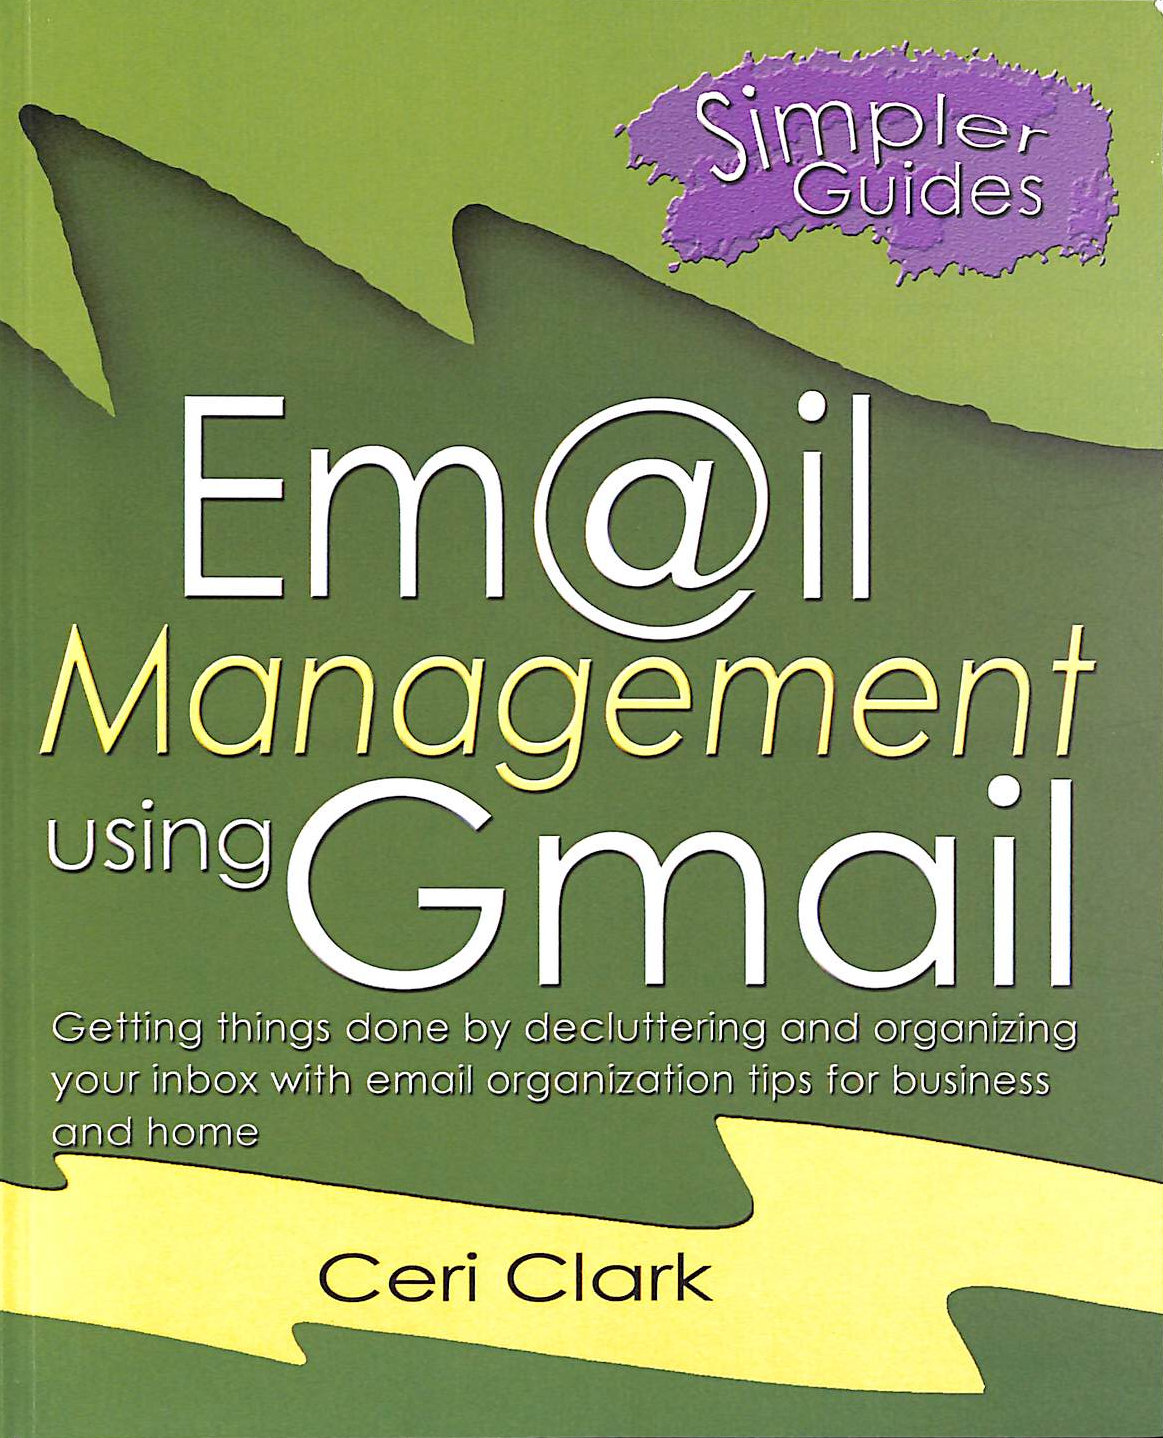 CLARK, CERI - Email Management Using Gmail: Getting Things Done By Decluttering And Organizing Your Inbox With Email Organization Tips For Business And Home